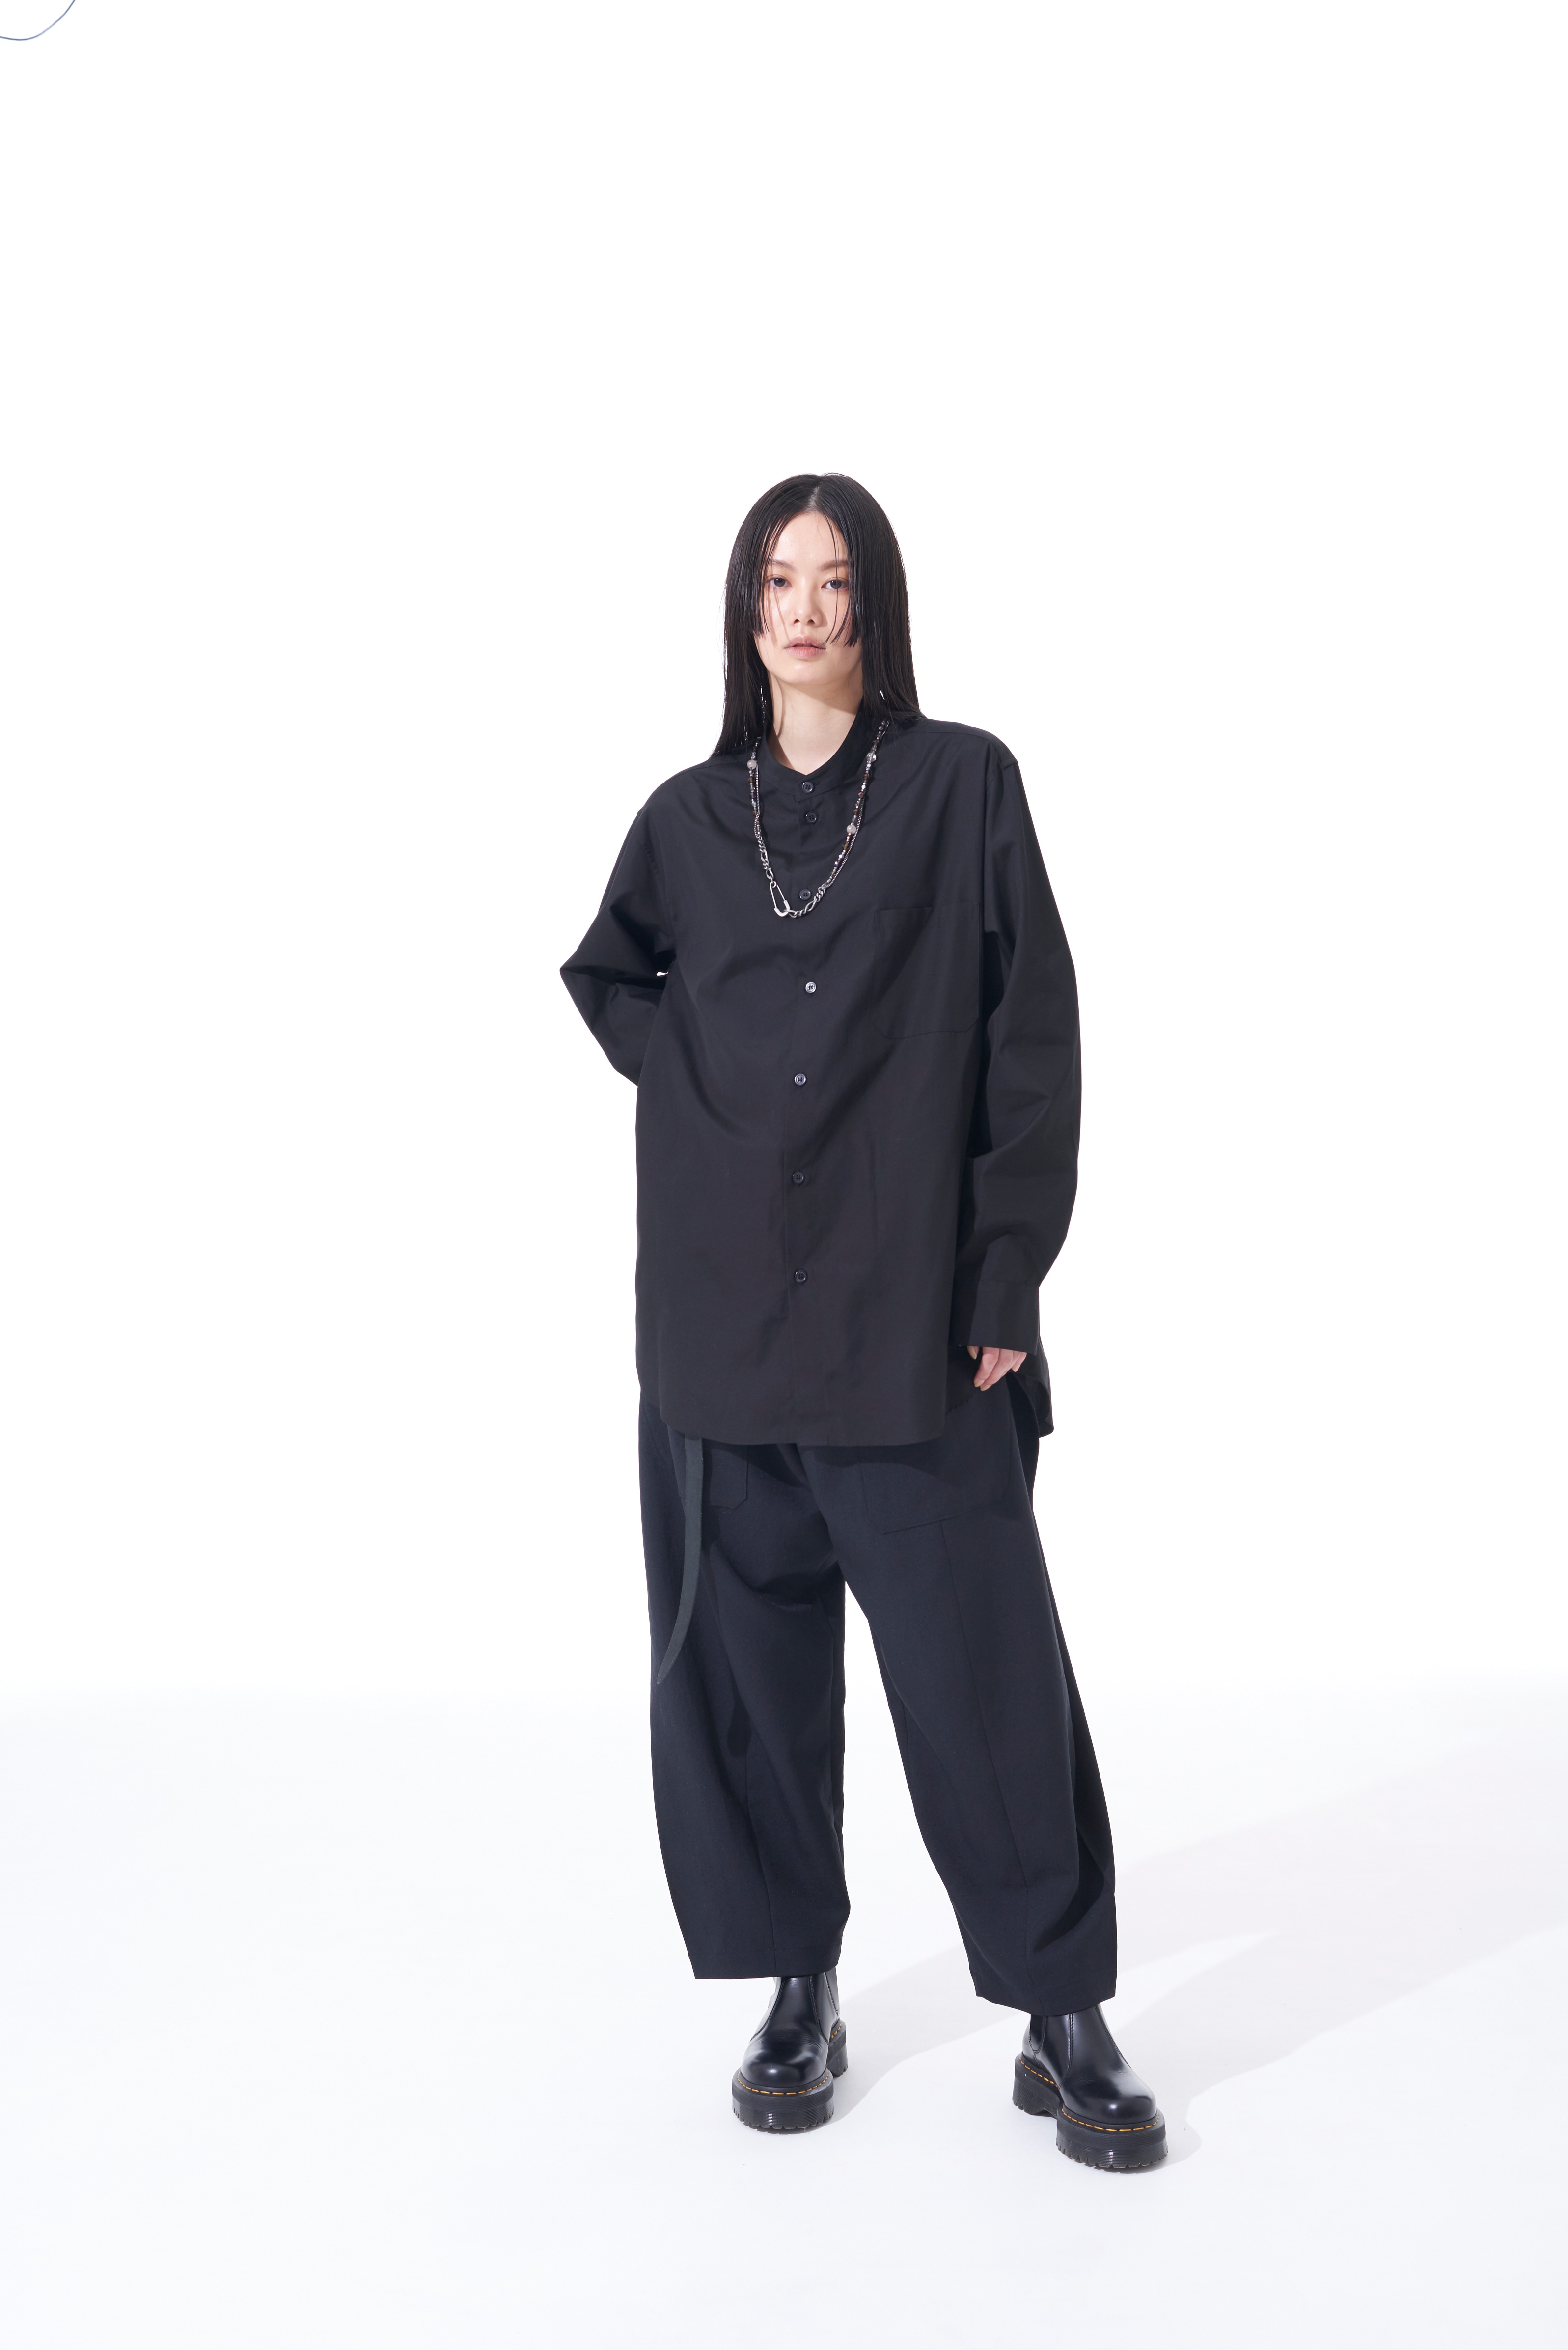 SHIWANOARU POLYESTER STRETCH TWILL WAIST ADJUSTABLE VERTICAL JOINT PANTS